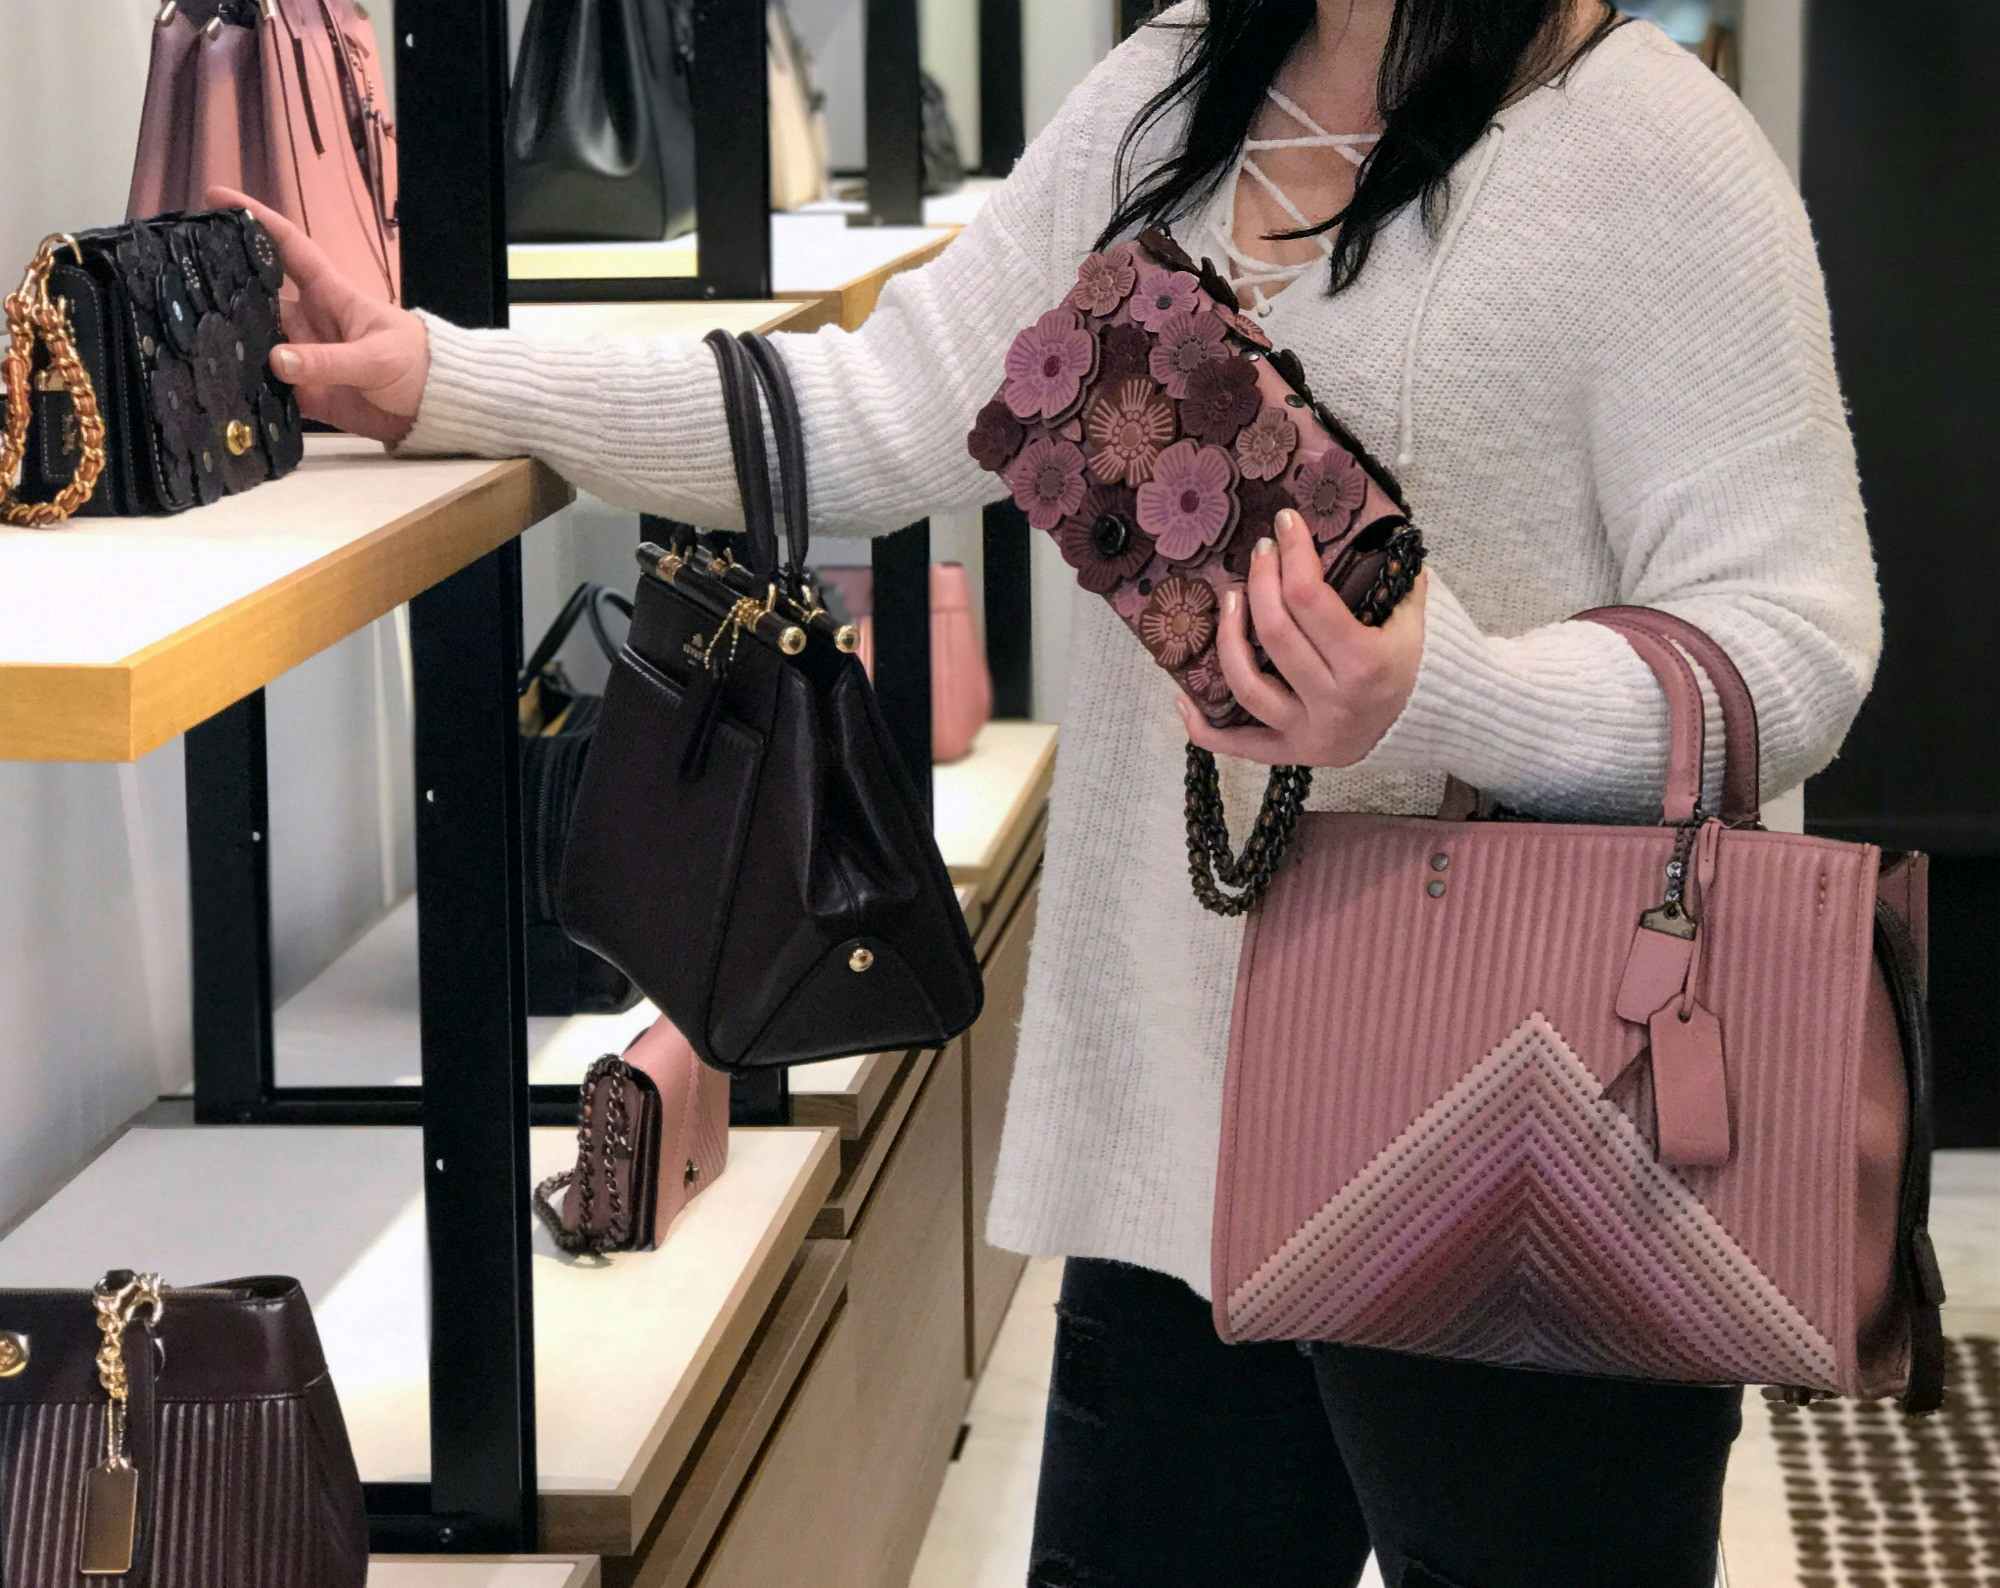 Coach: 50% Off ALL Bags + An EXTRA 65% Off Clearance Bags (Outlet Store  Online and In-Store!)